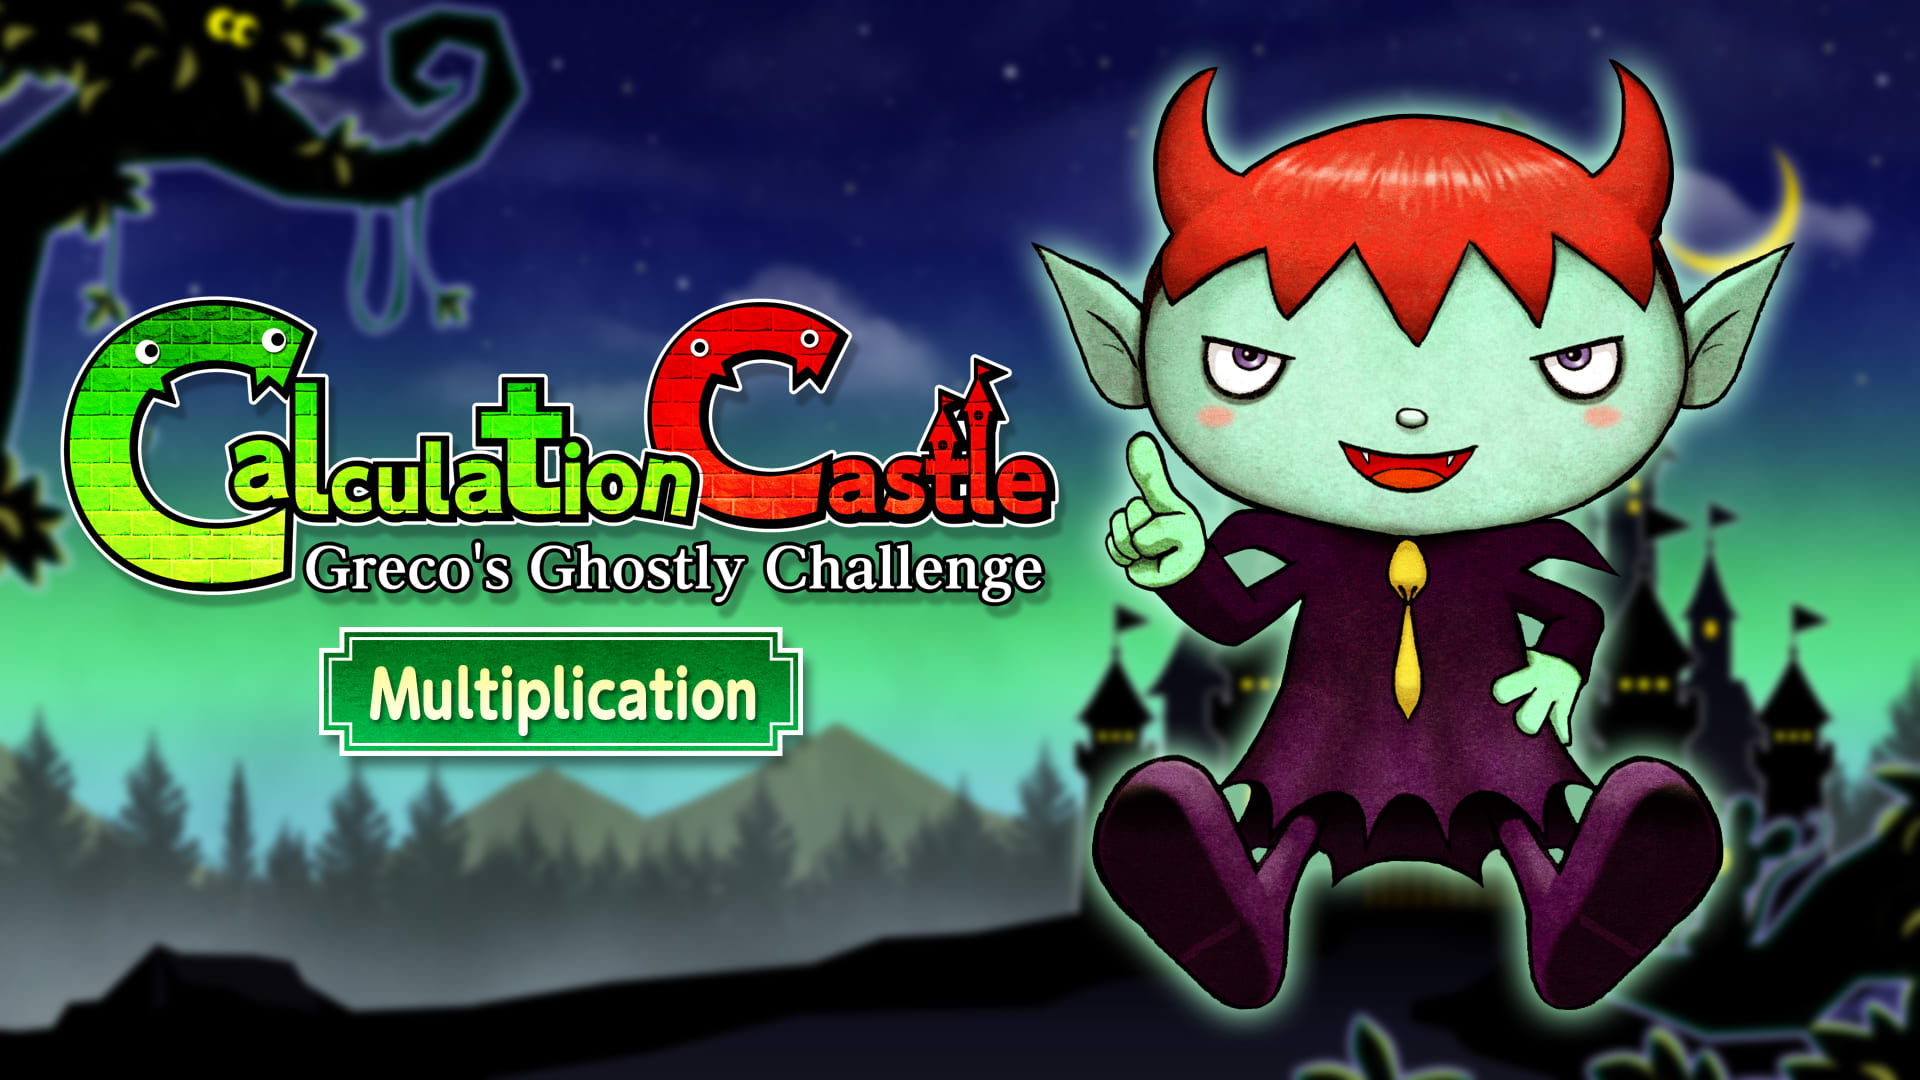 Calculation Castle : Greco's Ghostly Challenge "Multiplication "